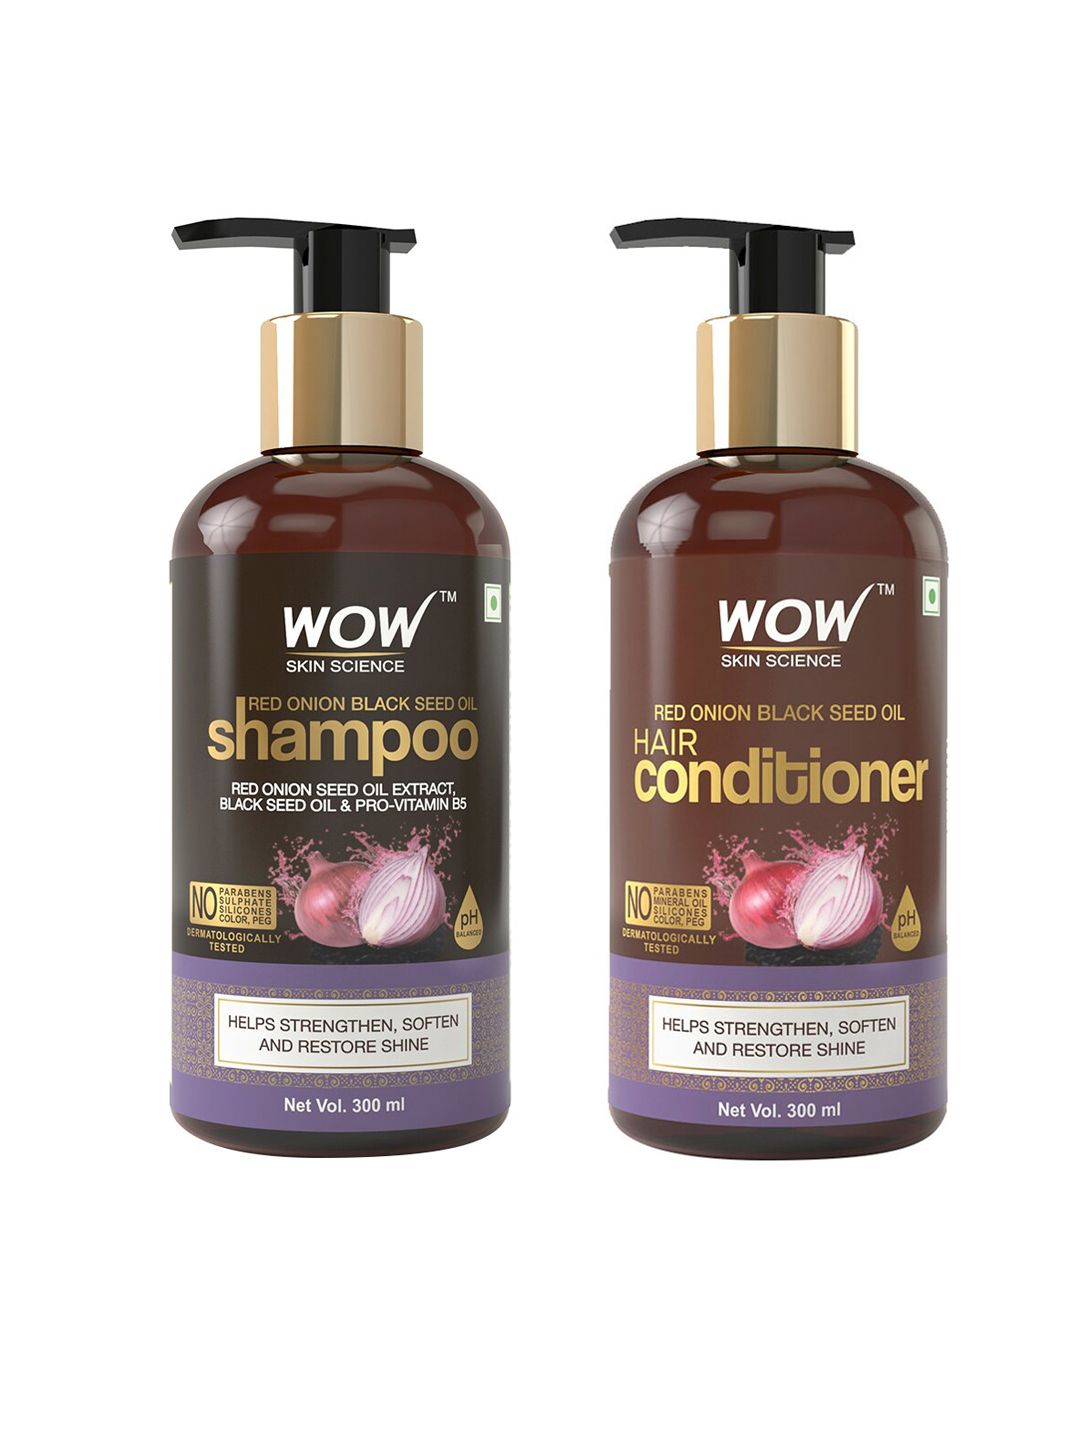 WOW SKIN SCIENCE Set of Onion Black Seed Oil Shampoo & Conditioner  - 600 ml Price in India